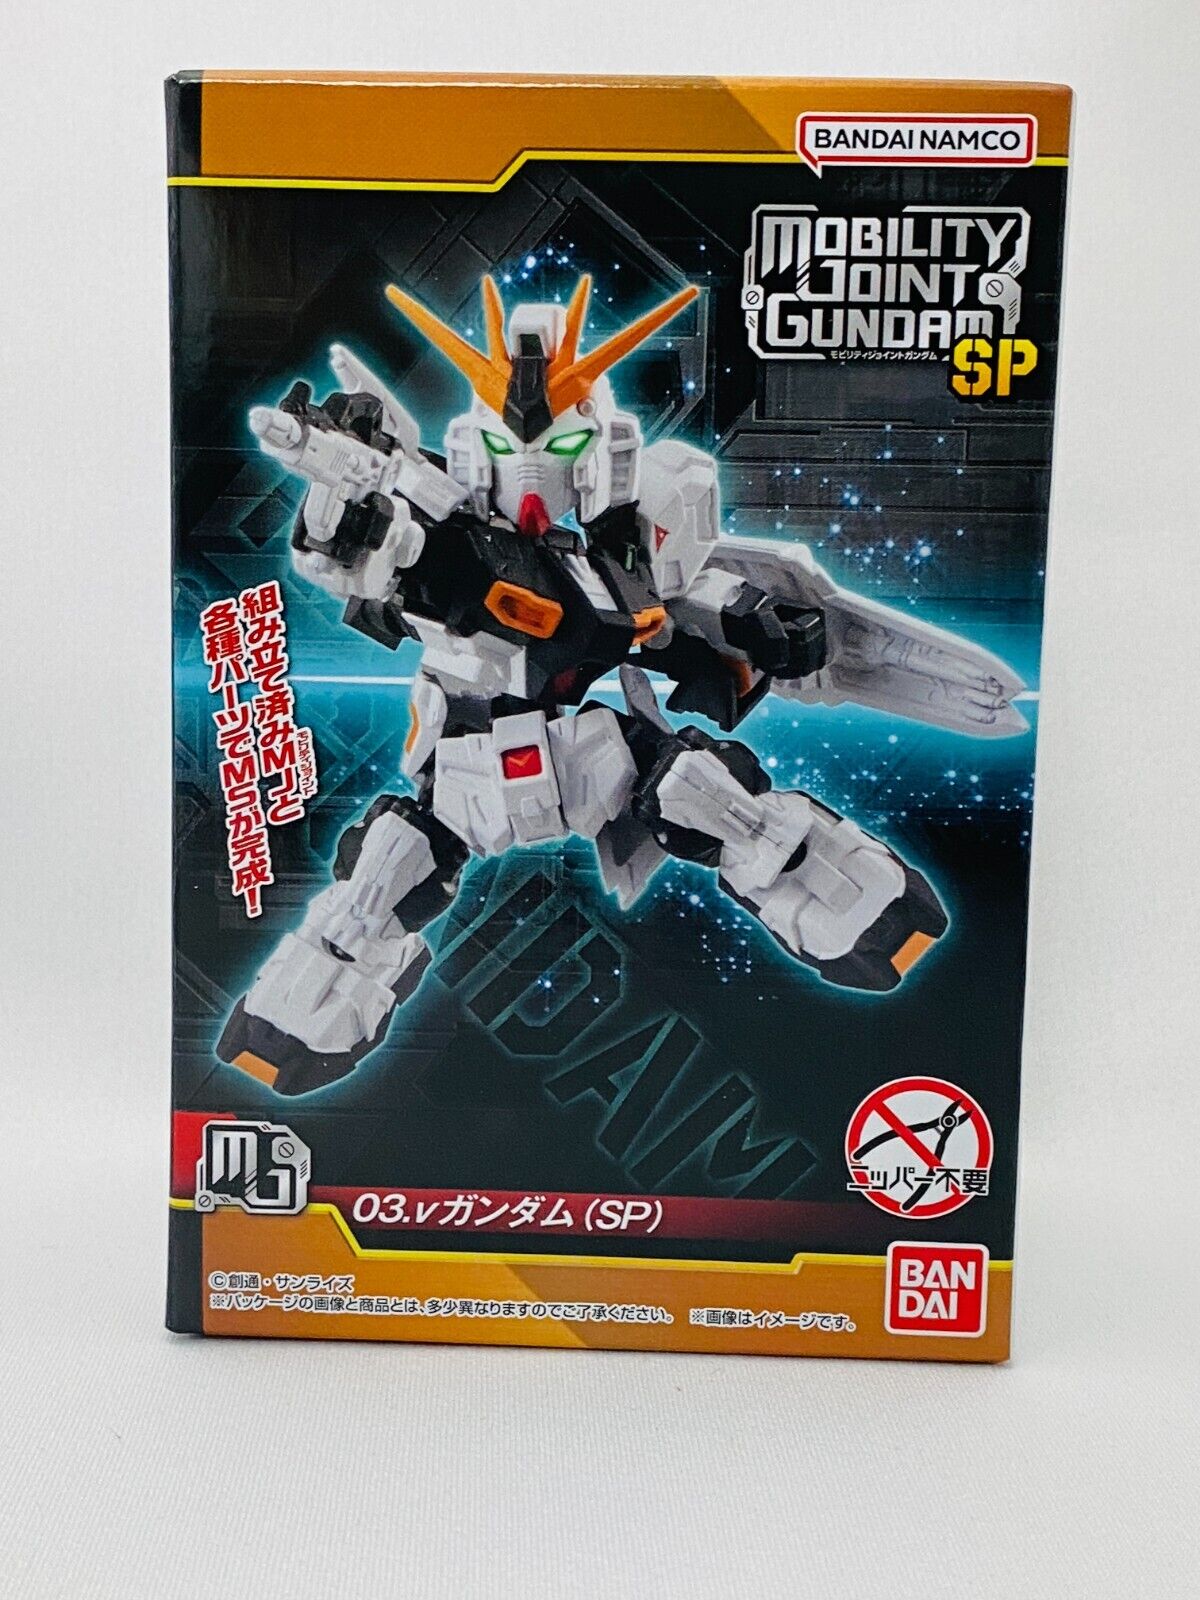 FW MOBILITY JOINT GUNDAM SP / 3. ν Gundam (SP) / BANDAI Collection Figure toy